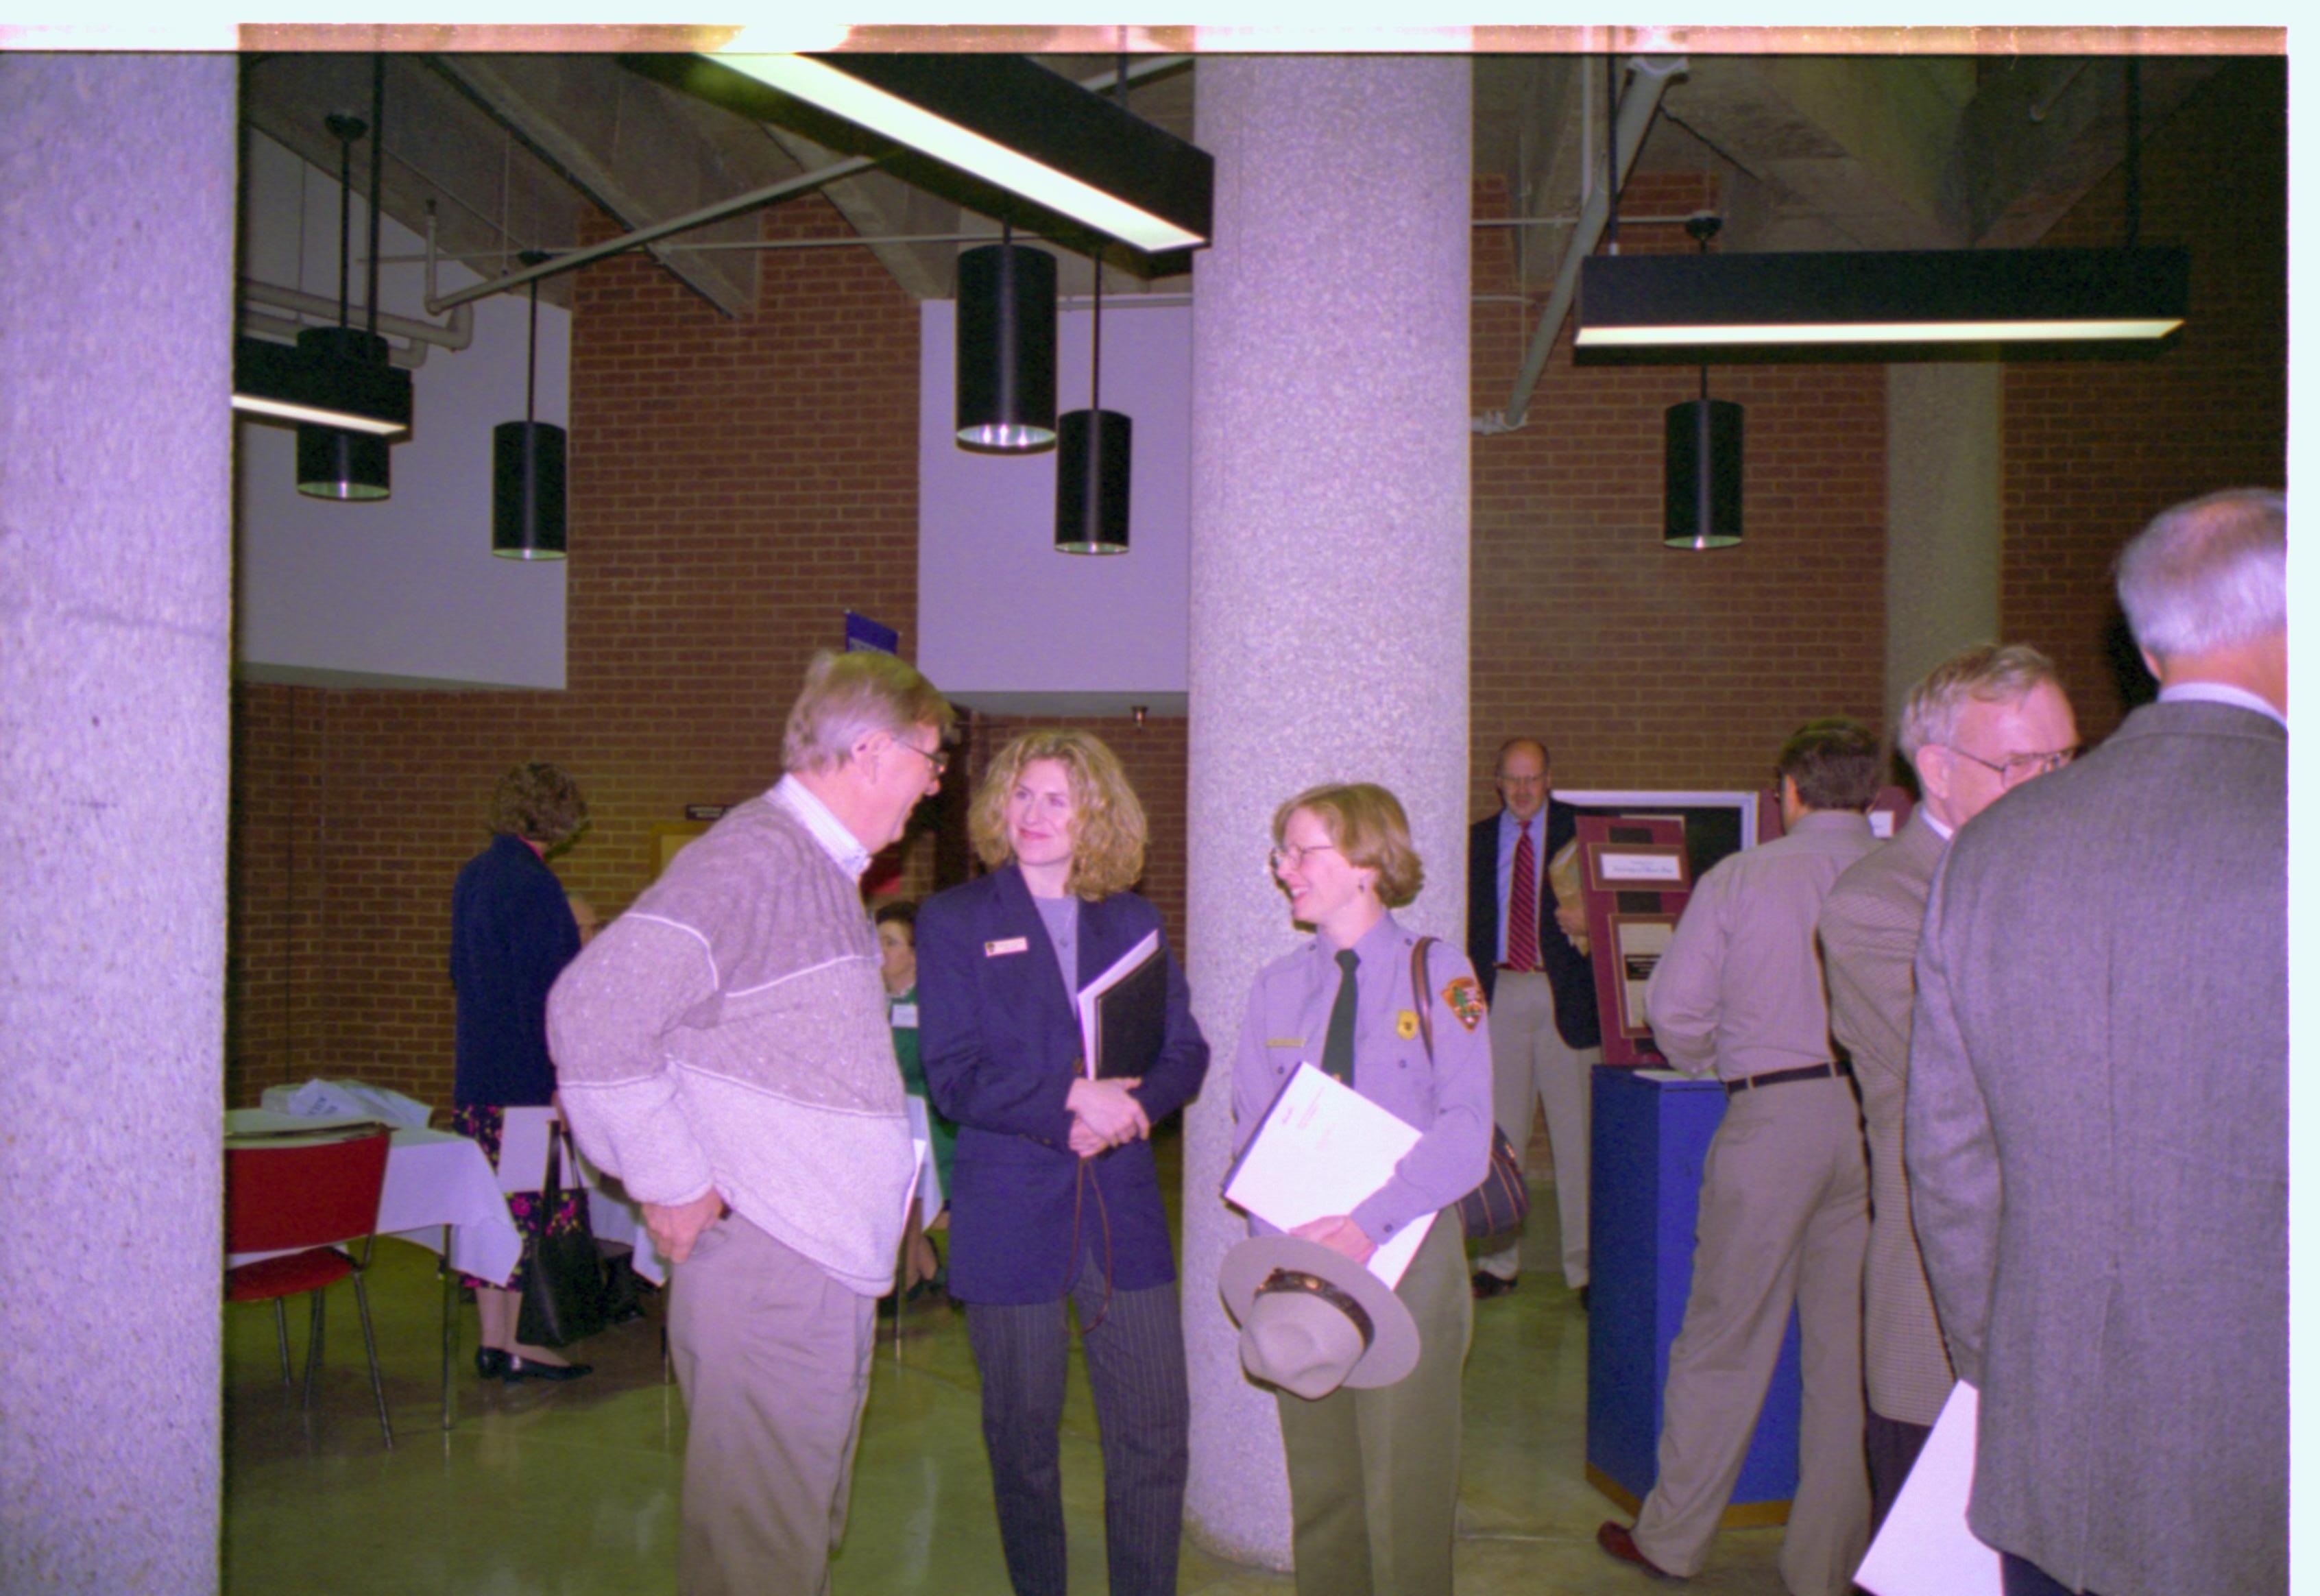 Ranger talking with man and woman in exhibit hall. 3-1997 Colloq (color); 21 Colloquium, 1997